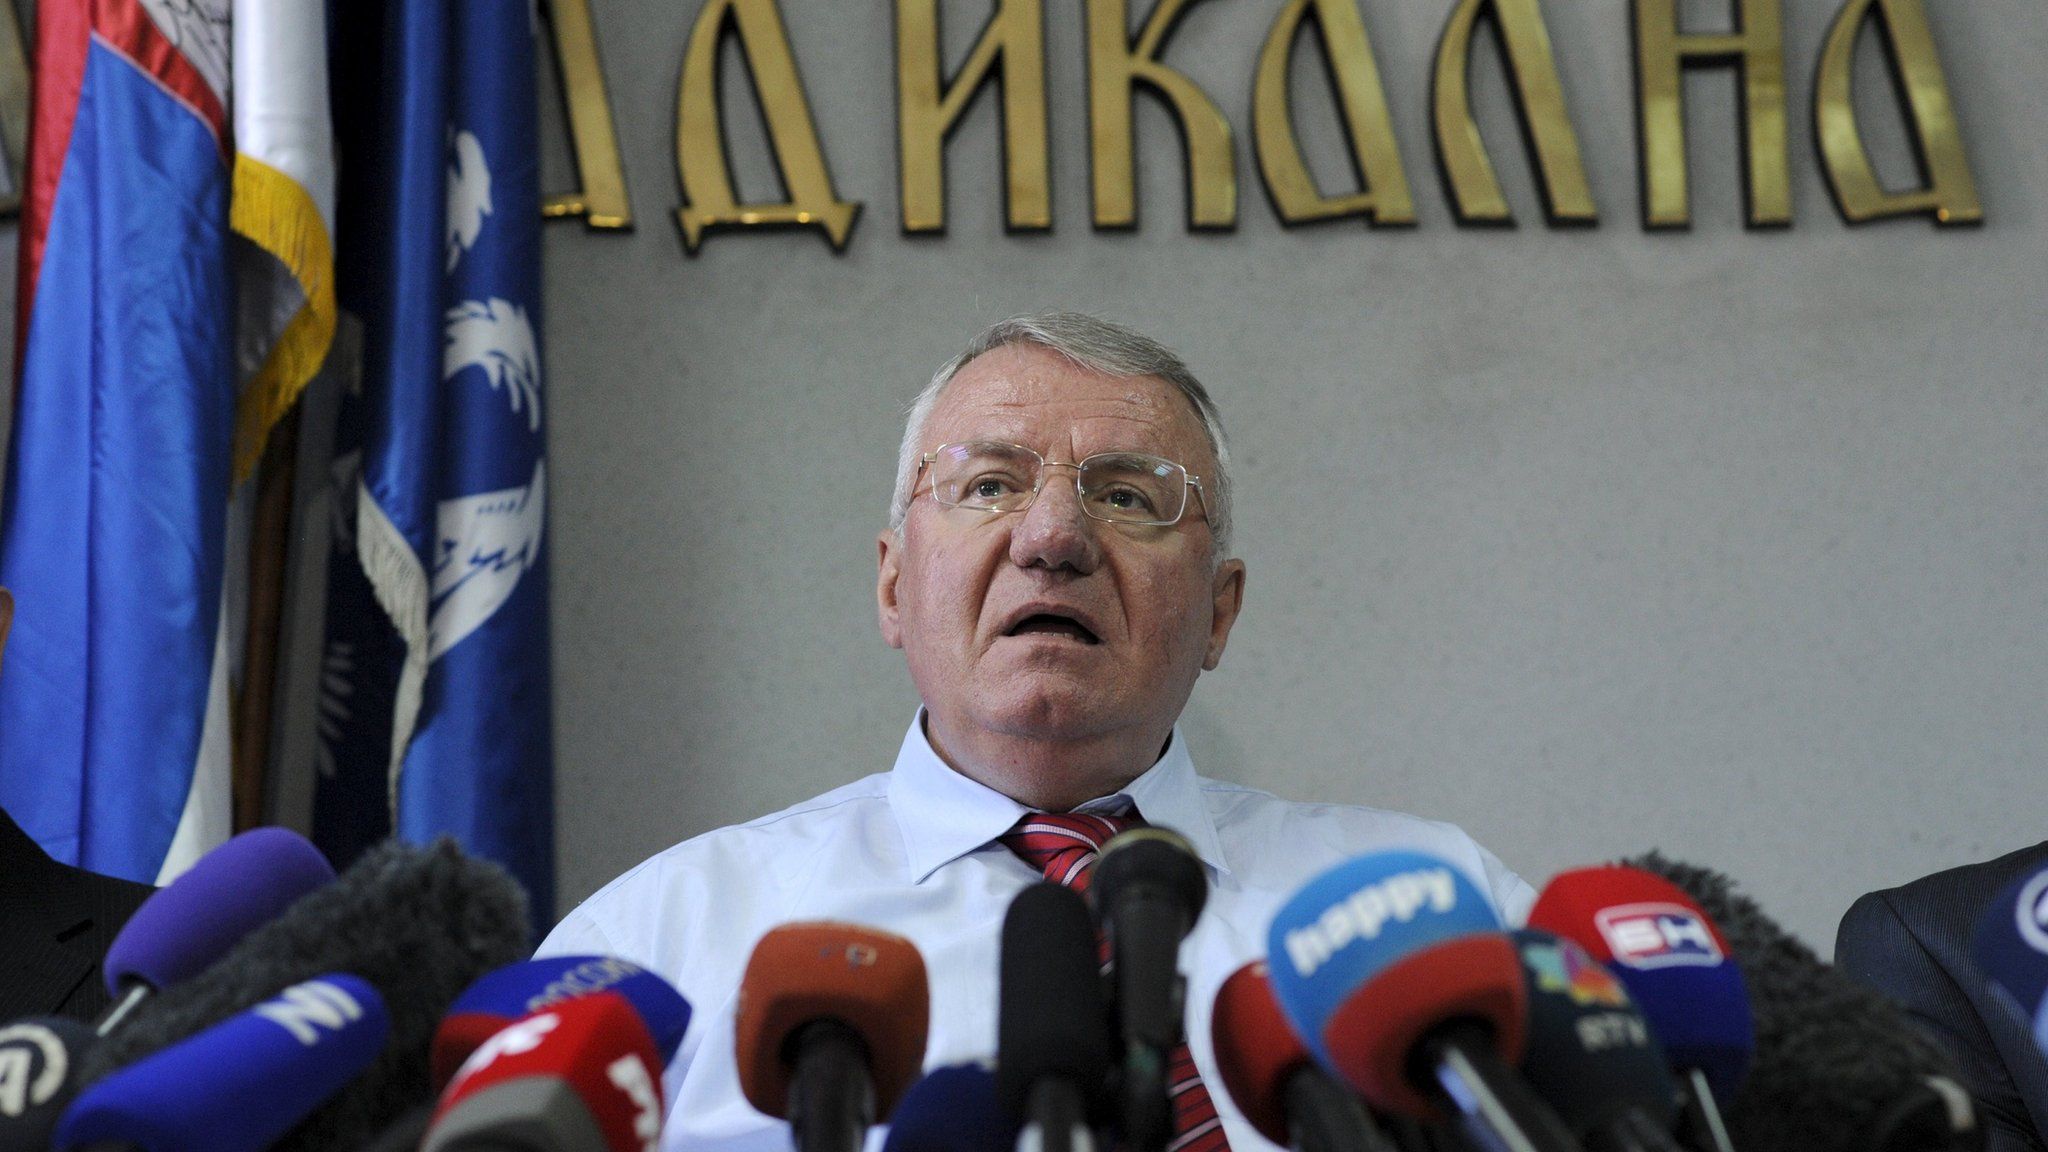 Vojislav Seselj speaks during a news conference in his Radical Party headquarters in Belgrade, 31 March 2016.